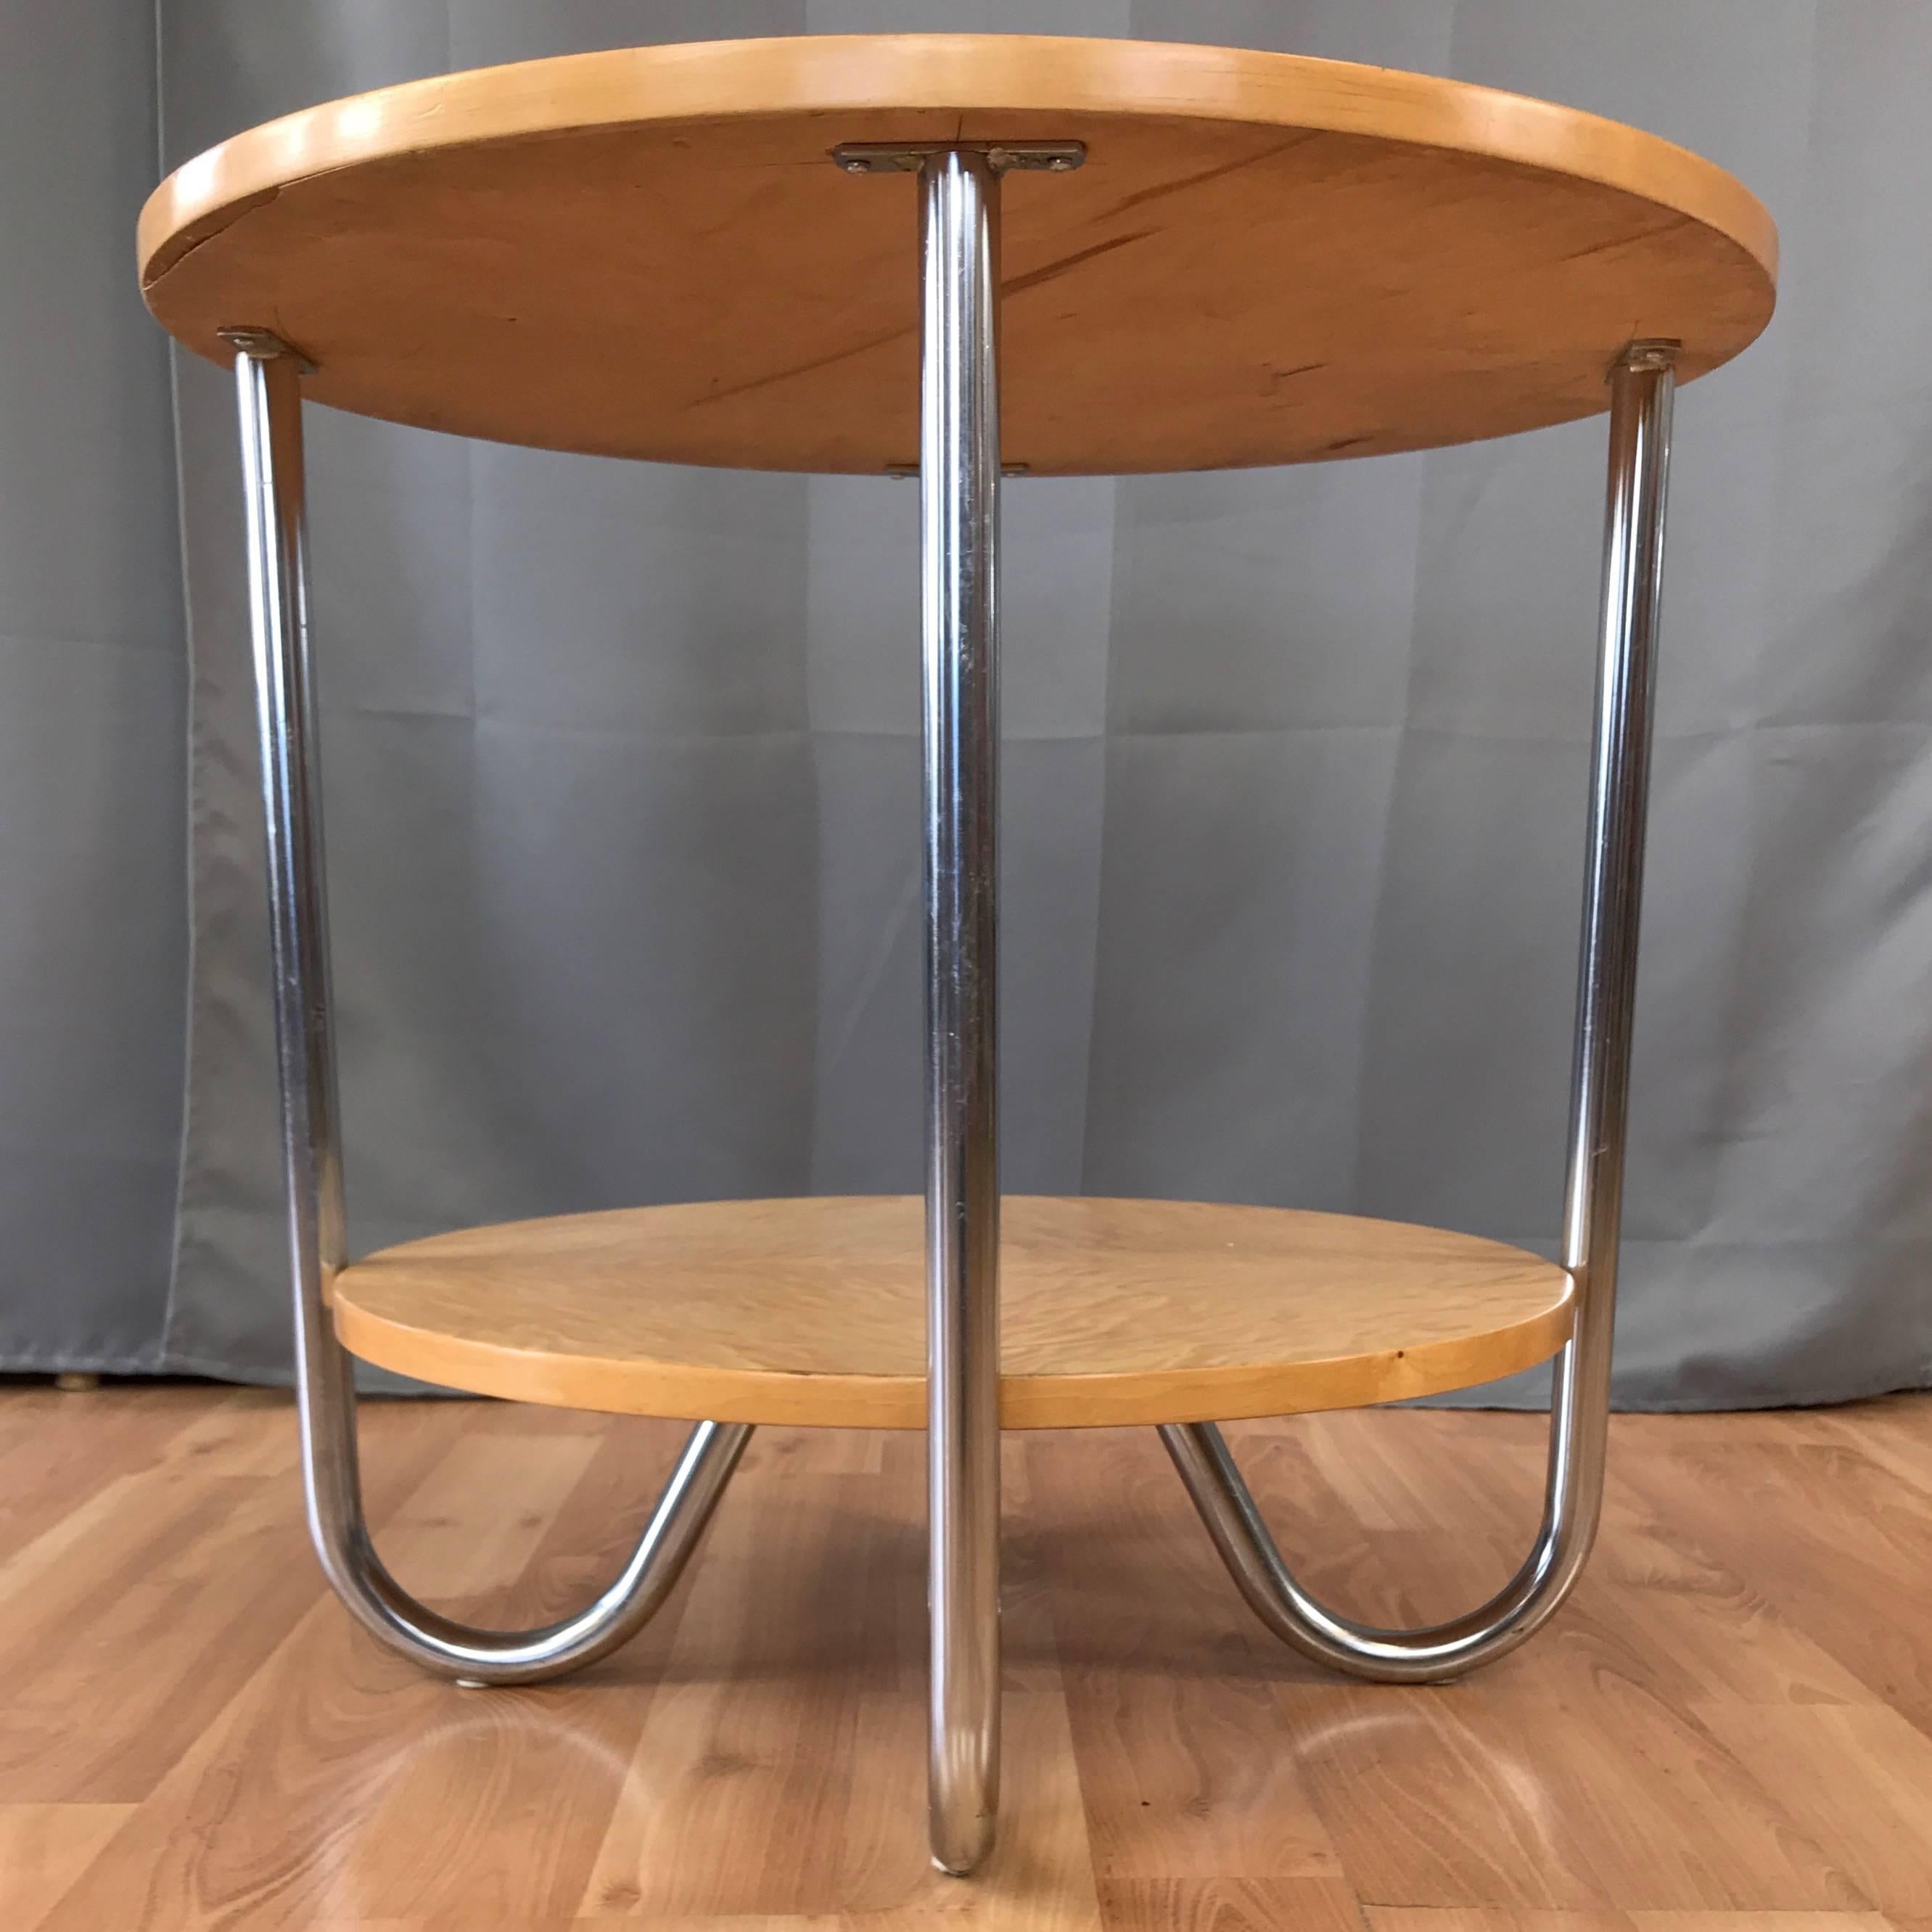 Two-Tier Maple Side Table Attributed to Wolfgang Hoffmann for Royal-Chrome 1